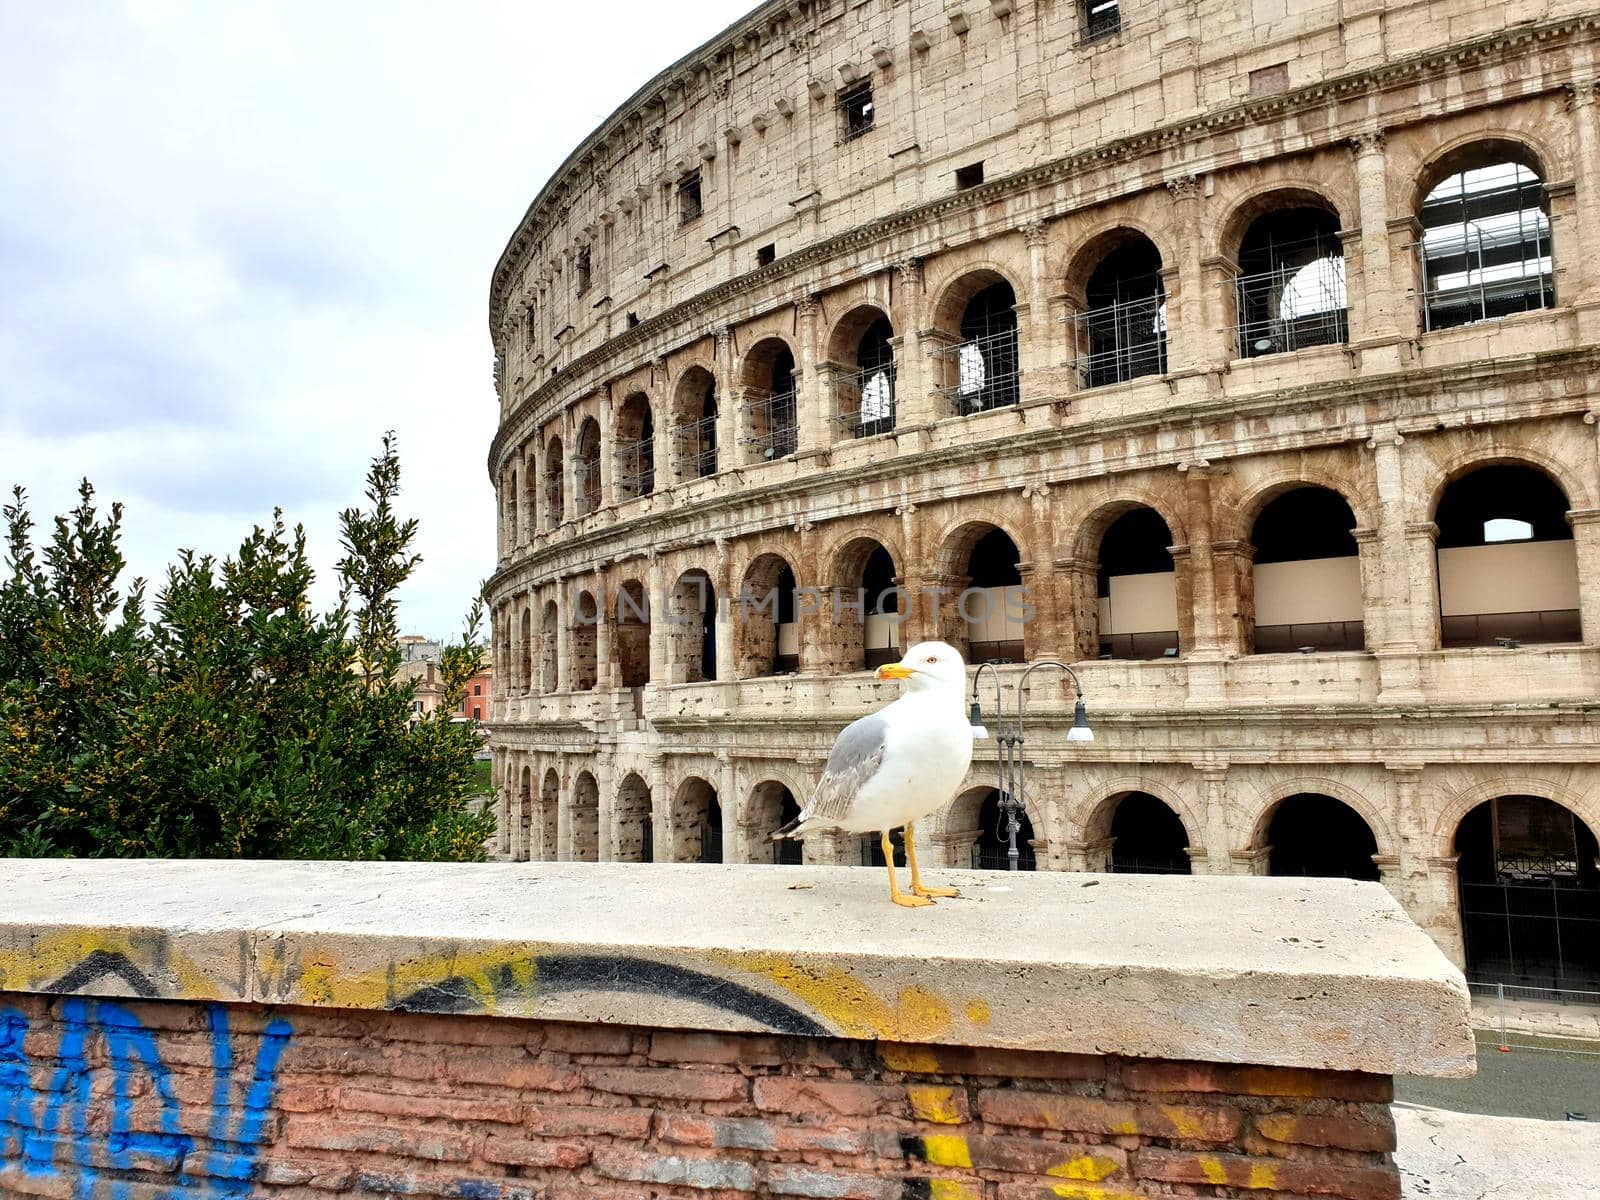 March 13th 2020, Rome, Italy: View of the Colosseum without tourists due to the quarantine, only a seagull